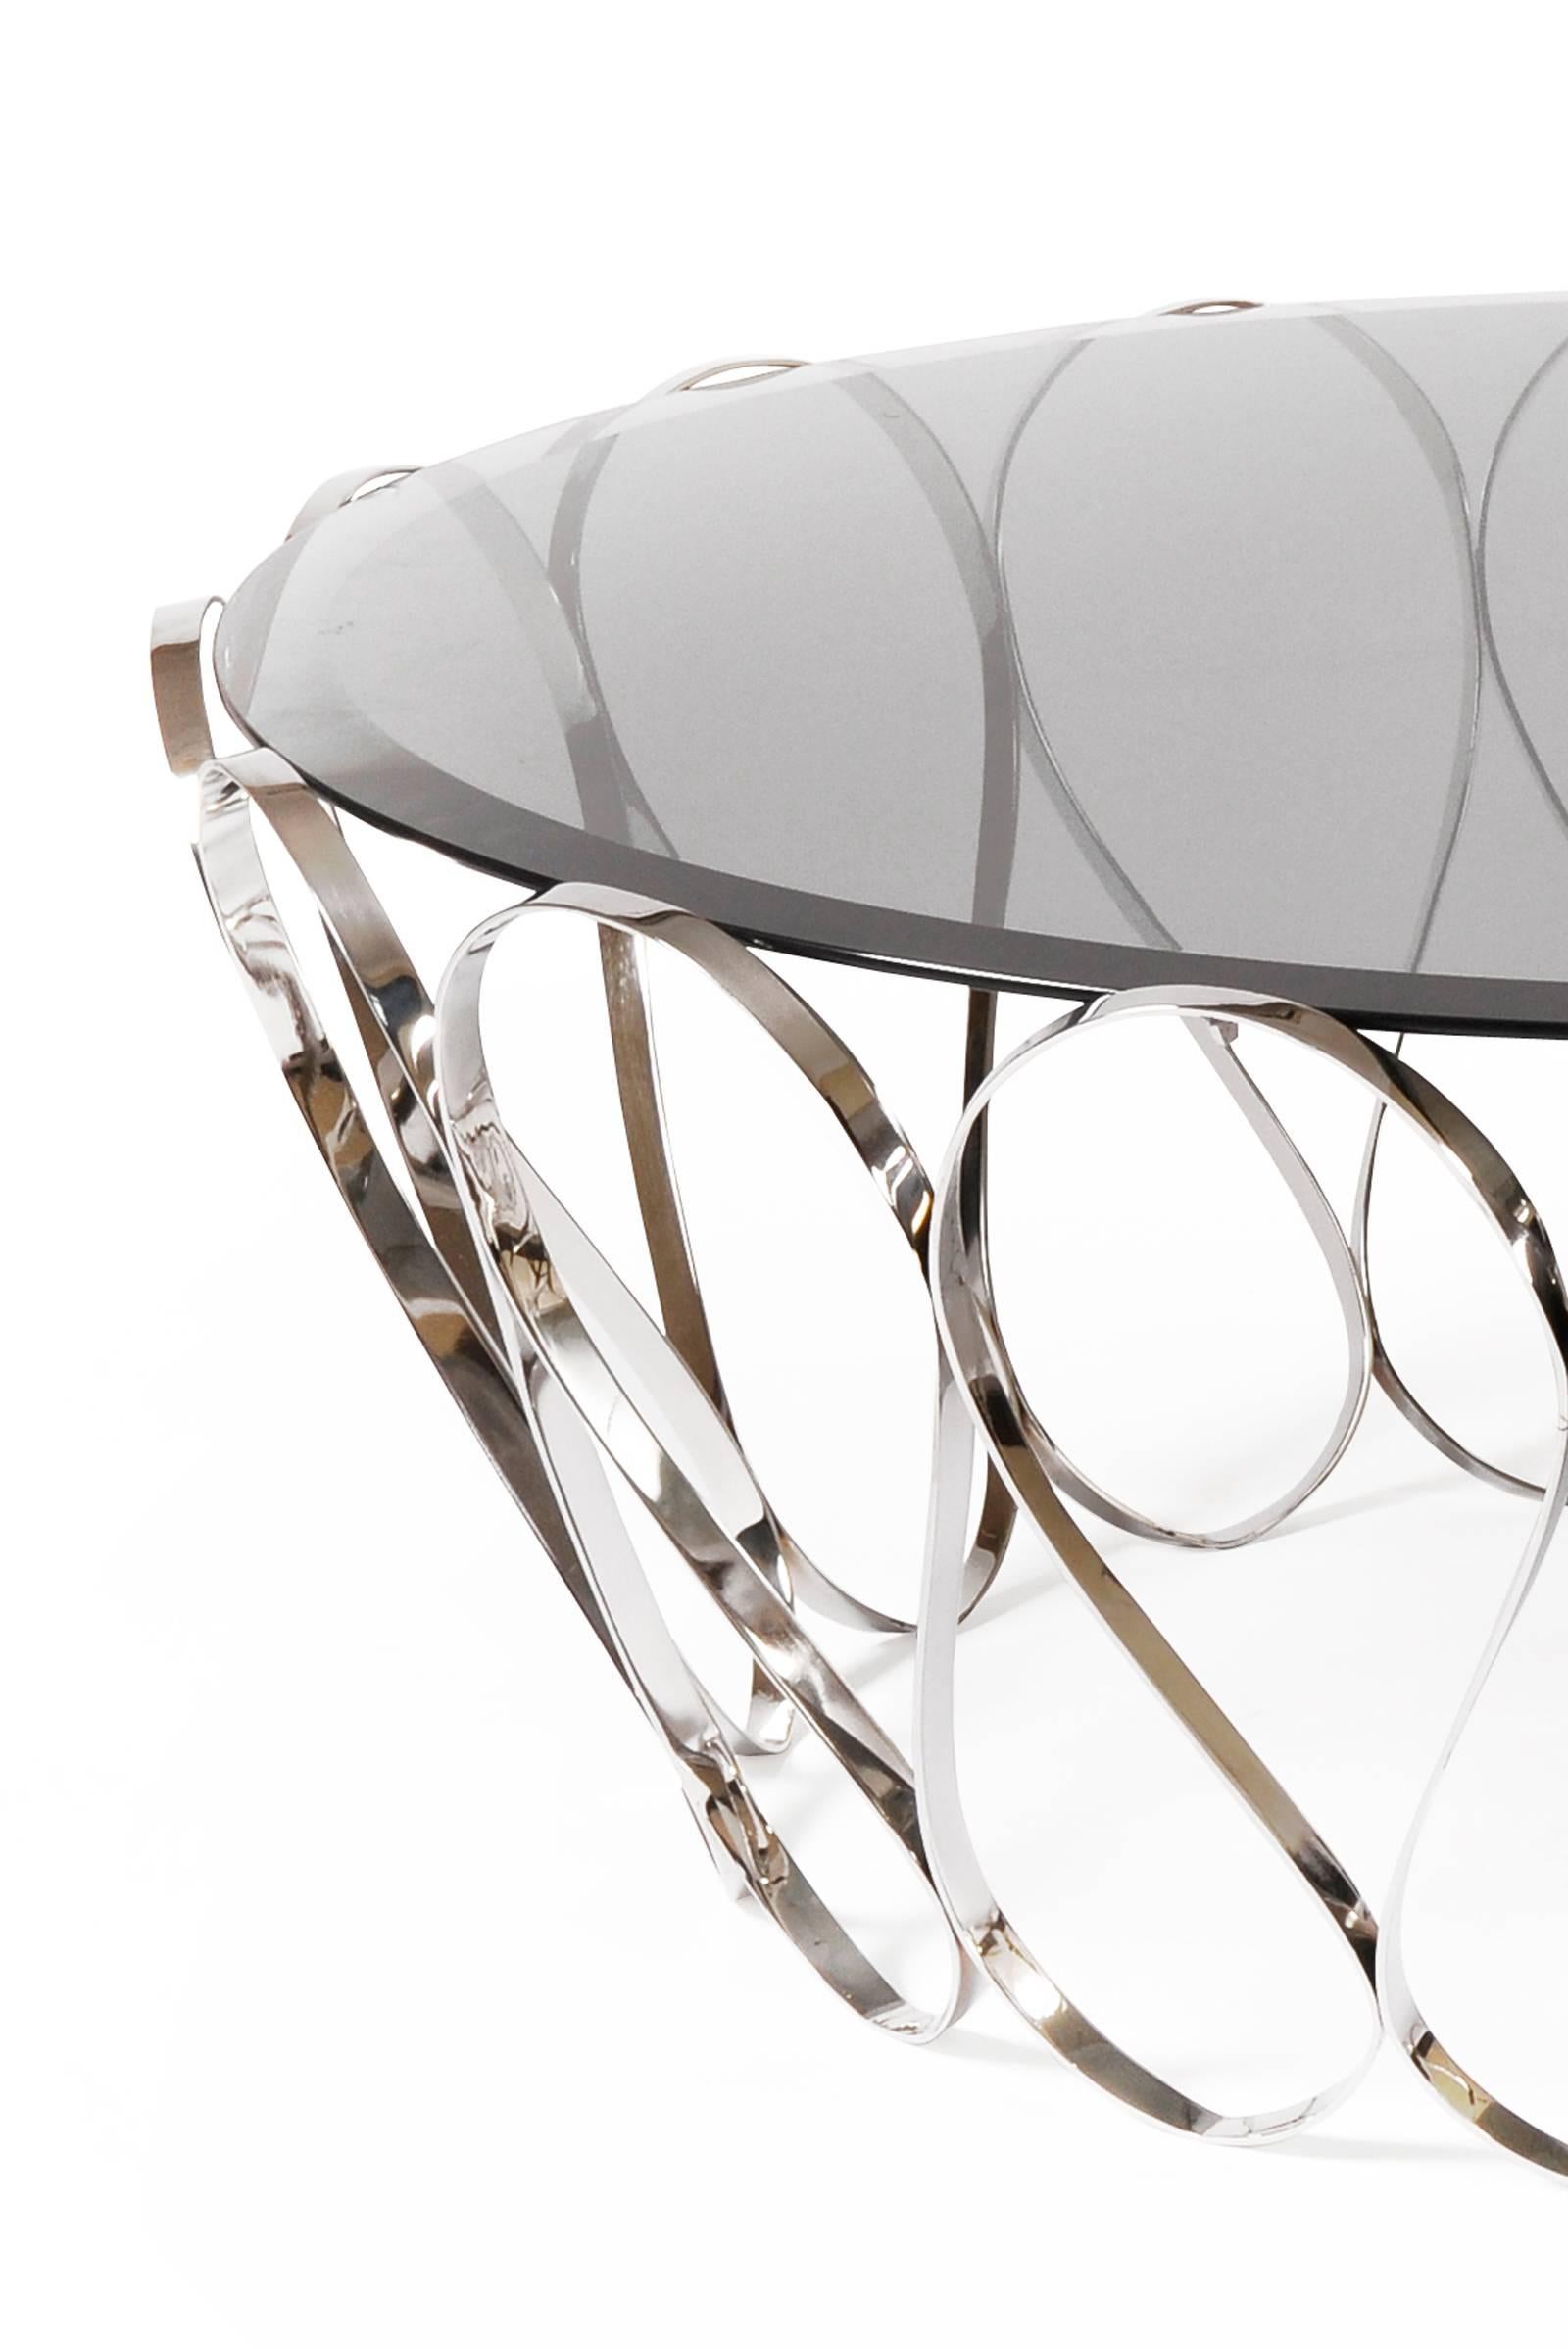 Coffee table waterflor with tempered smoked glass top 
and polished stainless steel structure.
